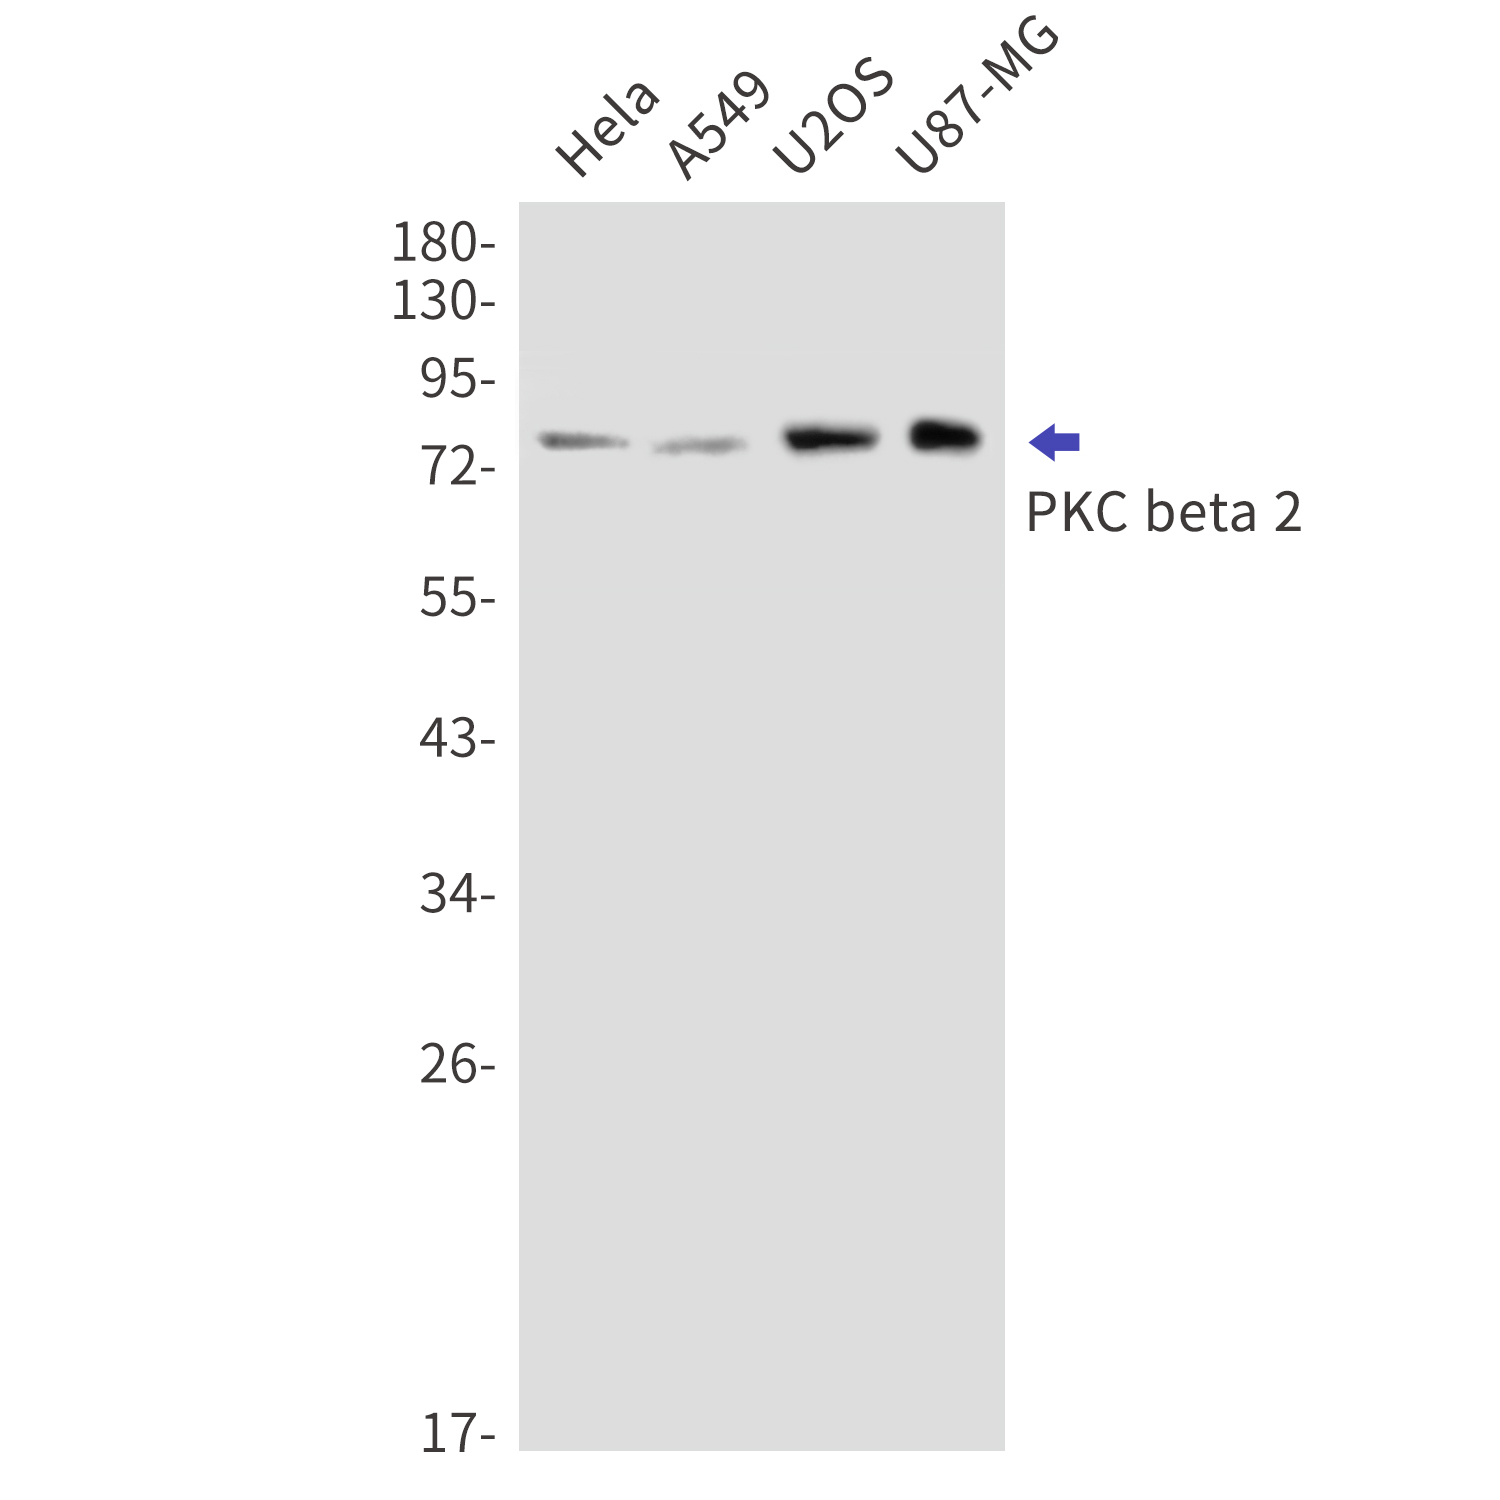 Western blot detection of PKC beta 2 in Hela,A549,U2OS,U87-MG cell lysates using PKC beta 2 Rabbit mAb(1:1000 diluted).Observed band size:77kDa.